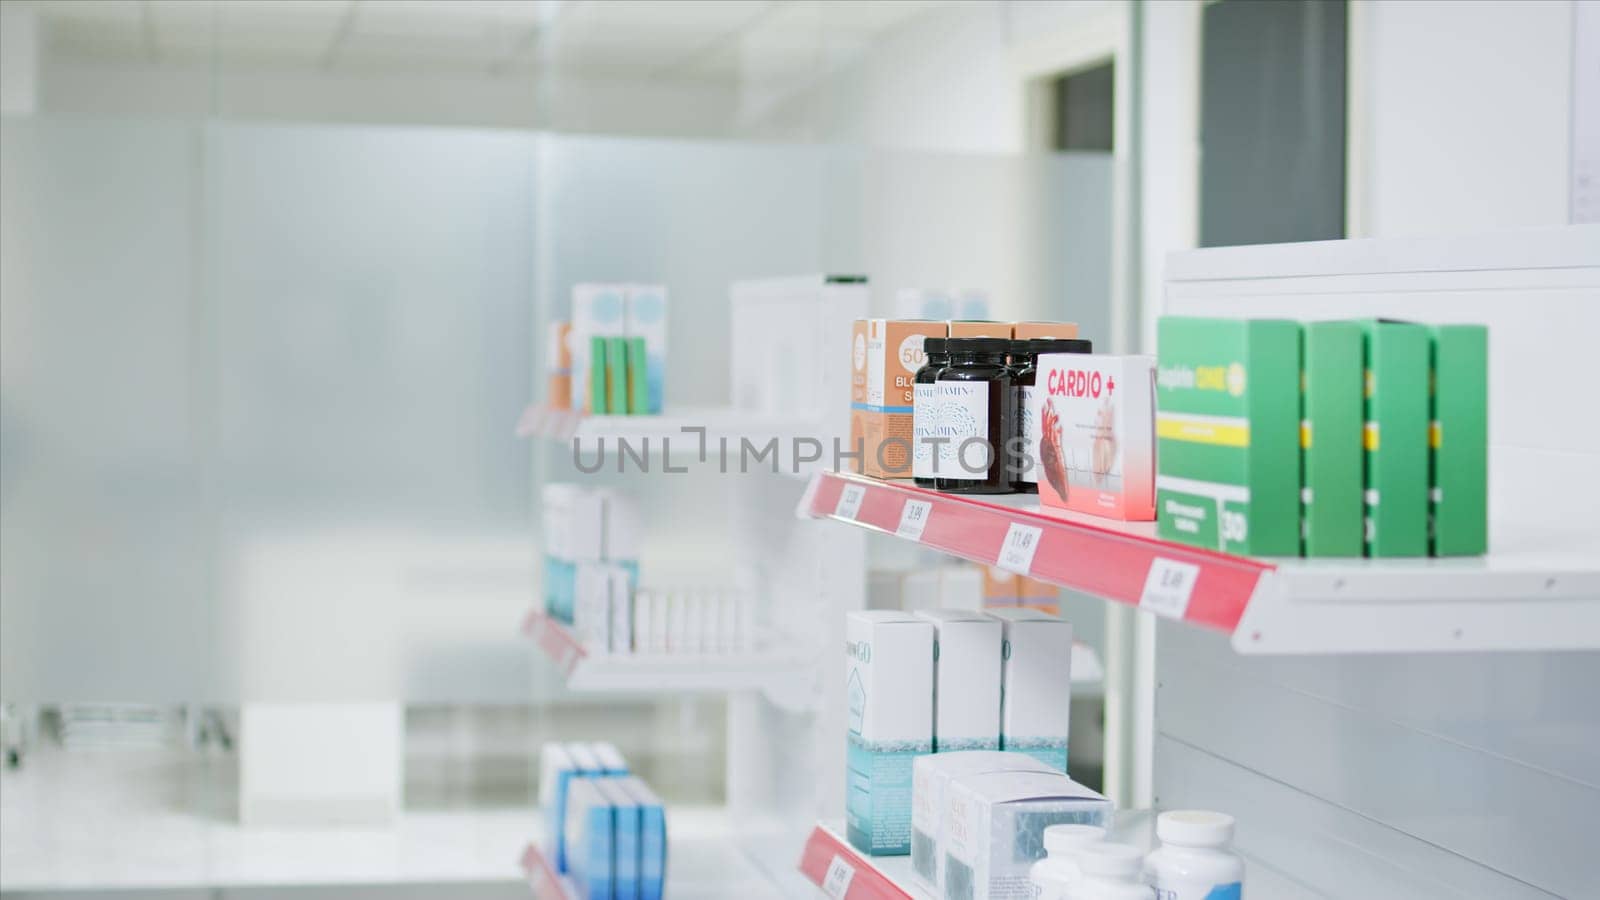 Selective focus of medicaments and supplements on shelves by DCStudio